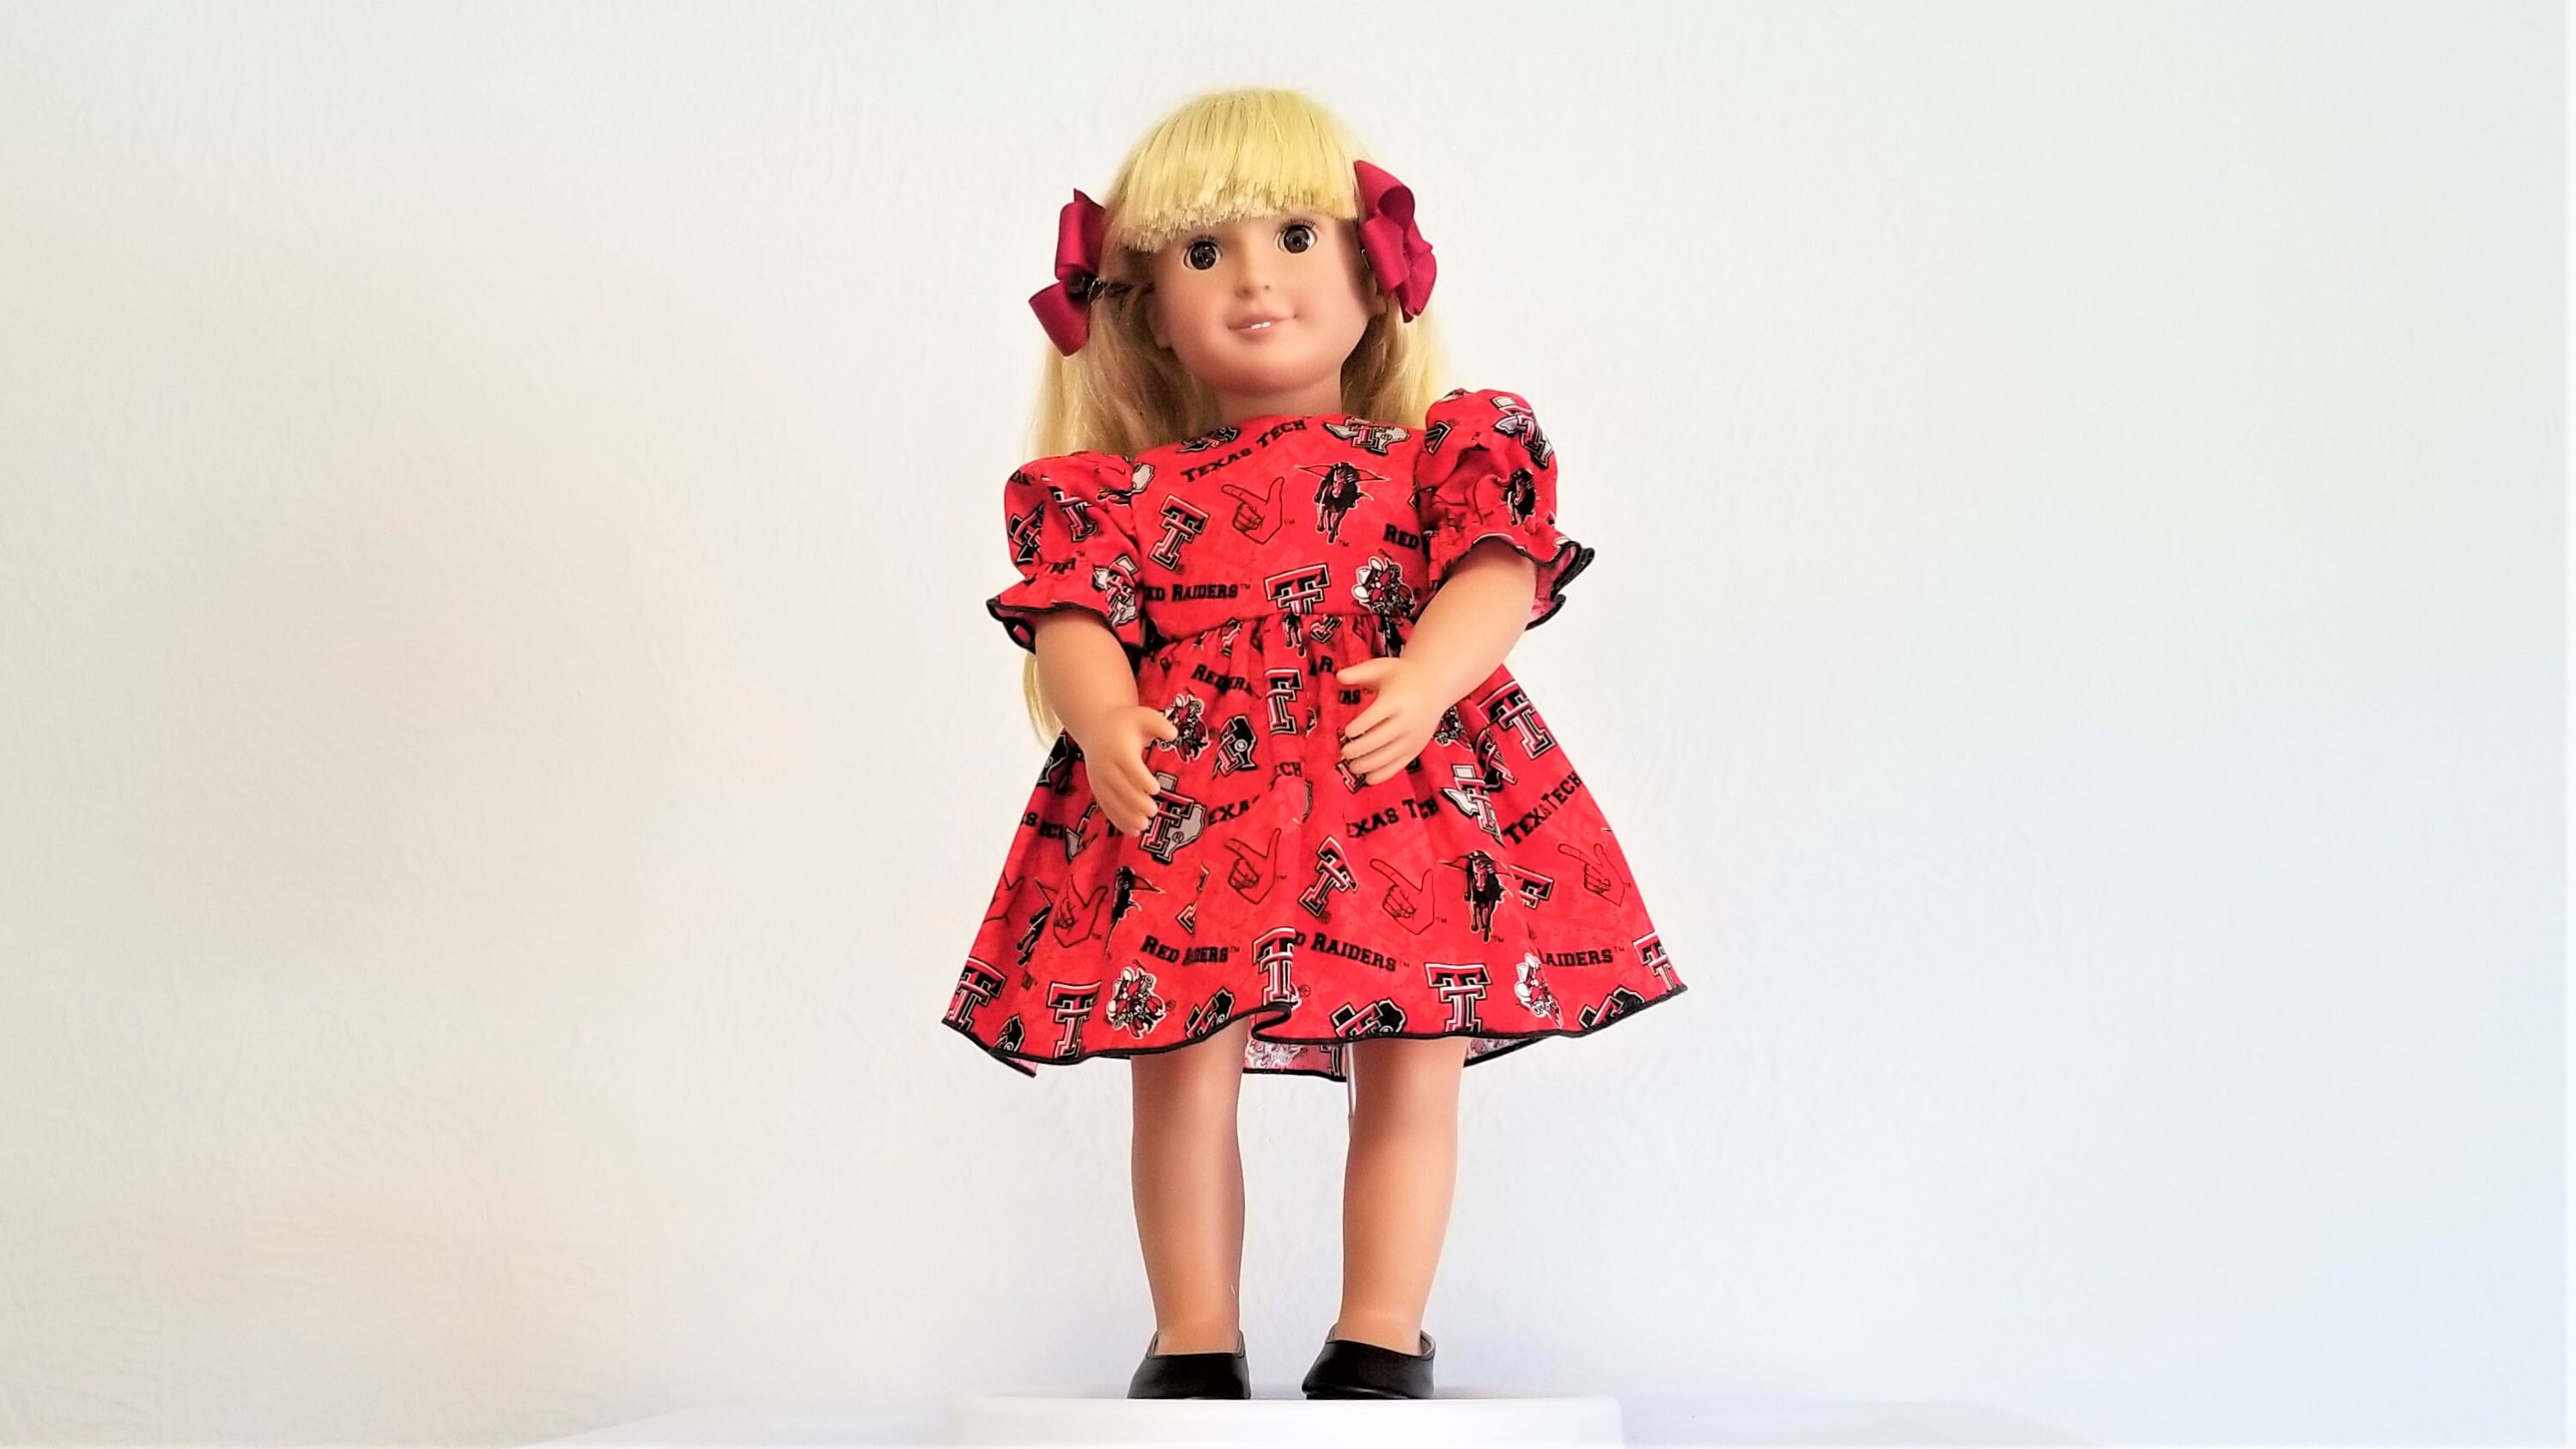 birthday gift for daughter Raider dress 18 inch doll clothes game day Texas Tech birthday gift for girl red dress doll dress